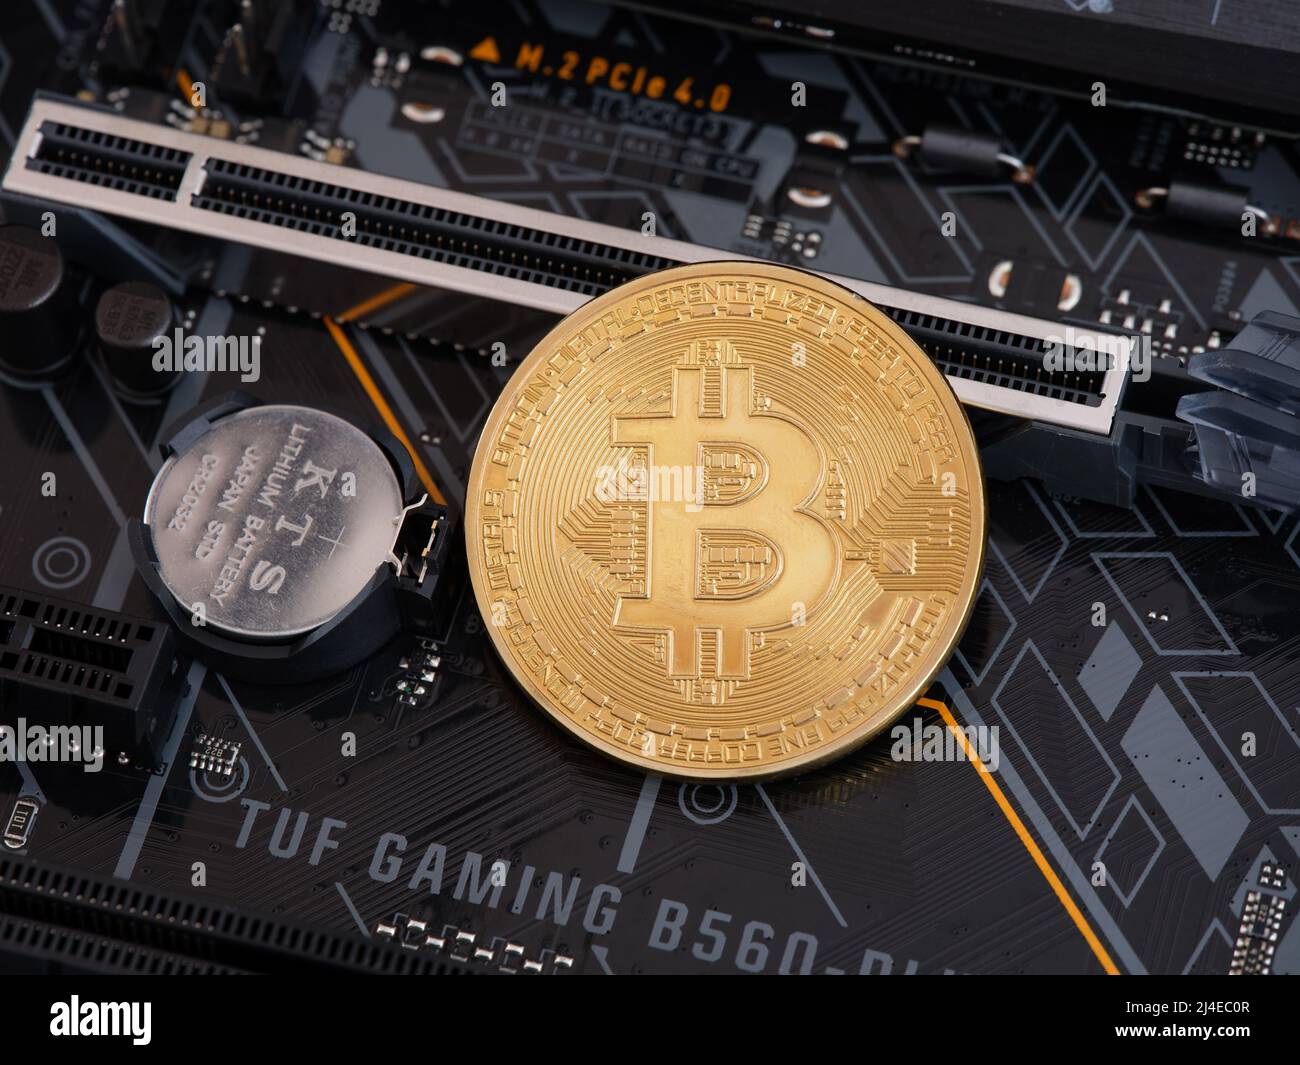 Tambov, Russian Federation - April 10, 2022 A Bitcoin Cryptocurrency lying on a PCI Express slot that is on a TUF Gaming Motherboard. Low key. Close u Stock Photo